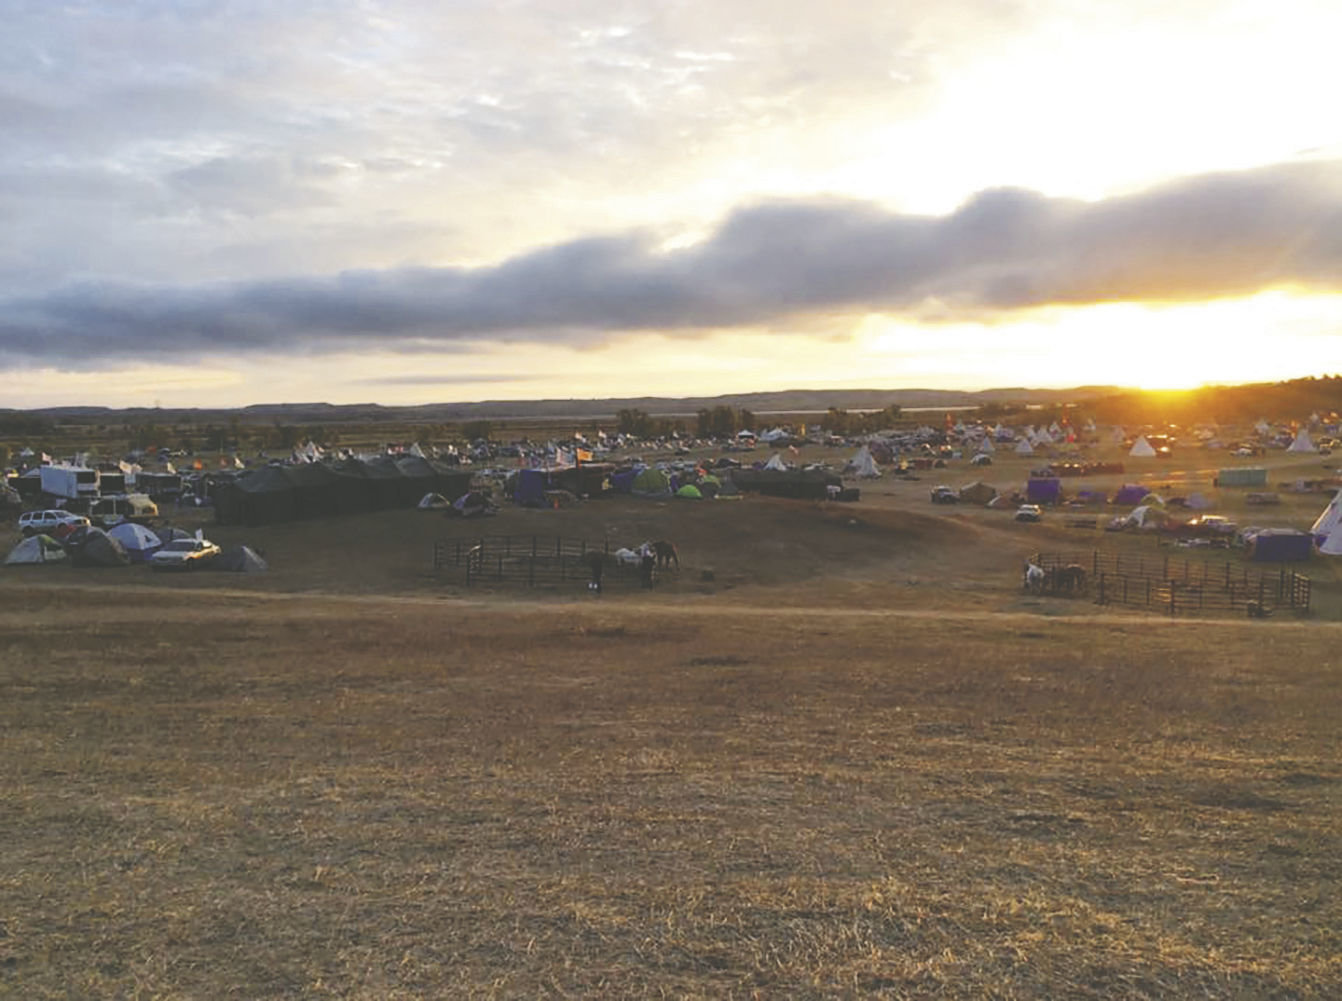 Gabriel Sky posted this photo of a sunrise over Oceti Sakowin Camp in North Dakota recently where he was part of the Standing Rock uprising. Courtesy photo Gabriel Sky via Facebook